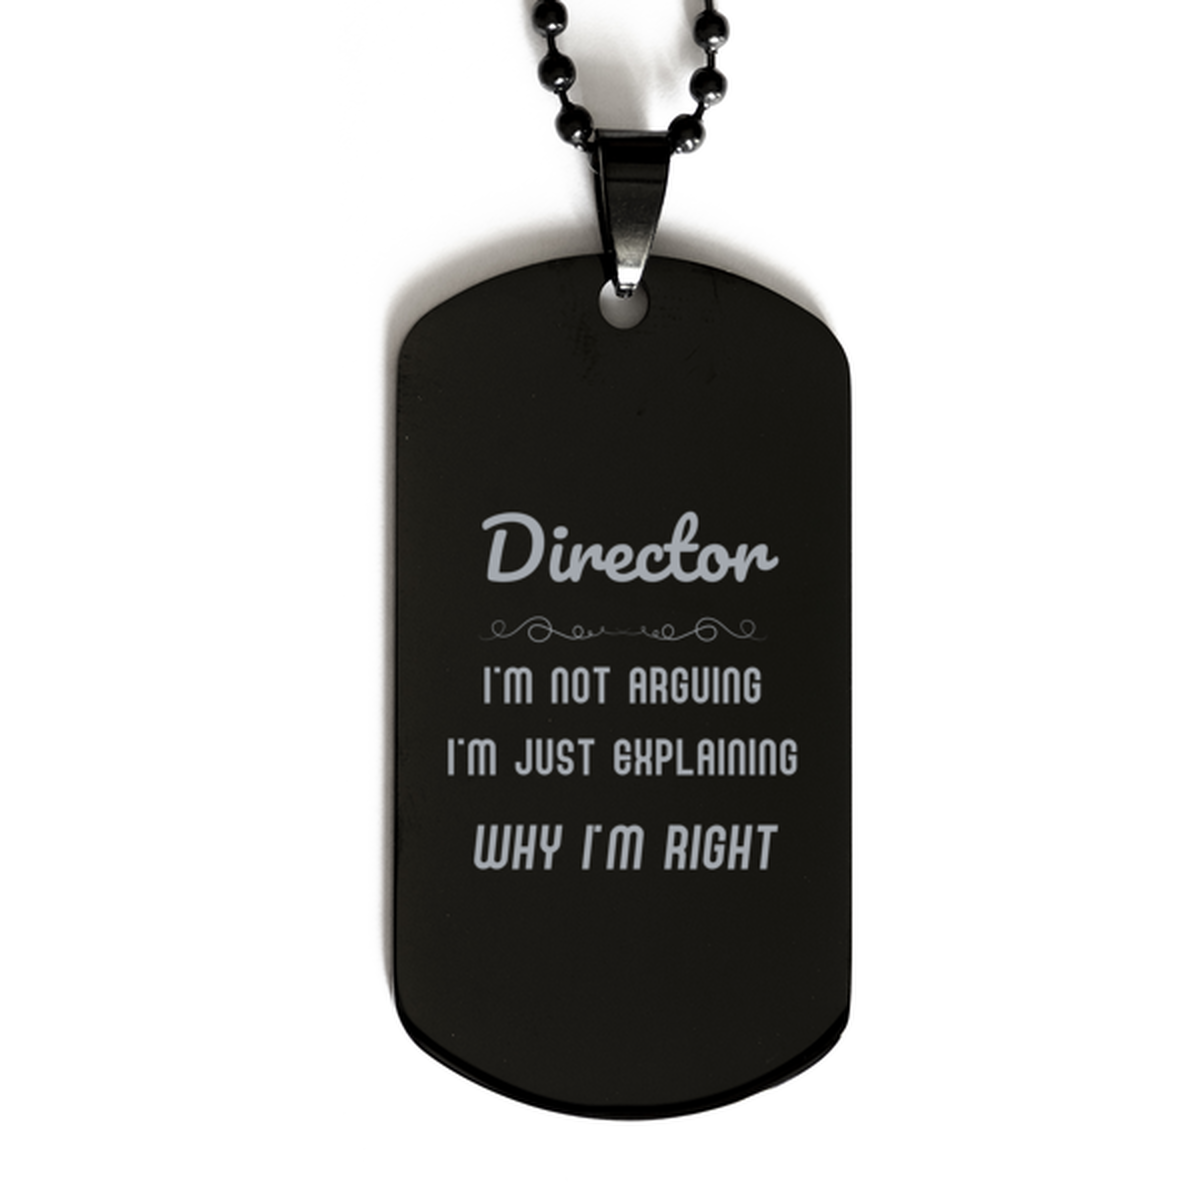 Director I'm not Arguing. I'm Just Explaining Why I'm RIGHT Black Dog Tag, Funny Saying Quote Director Gifts For Director Graduation Birthday Christmas Gifts for Men Women Coworker